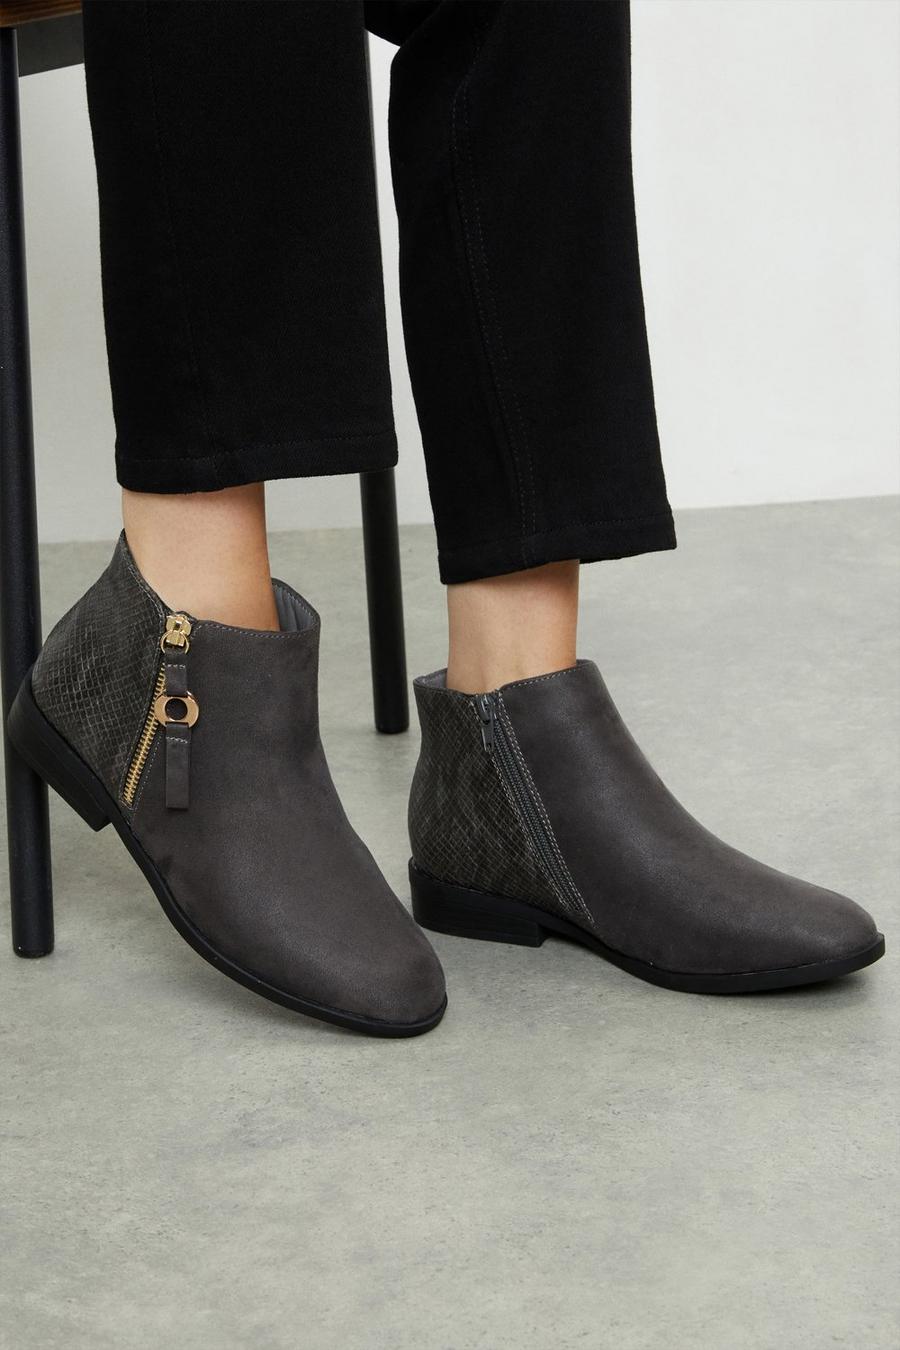 Good For The Sole: Mabel Comfort Snake Back Ankle Boots